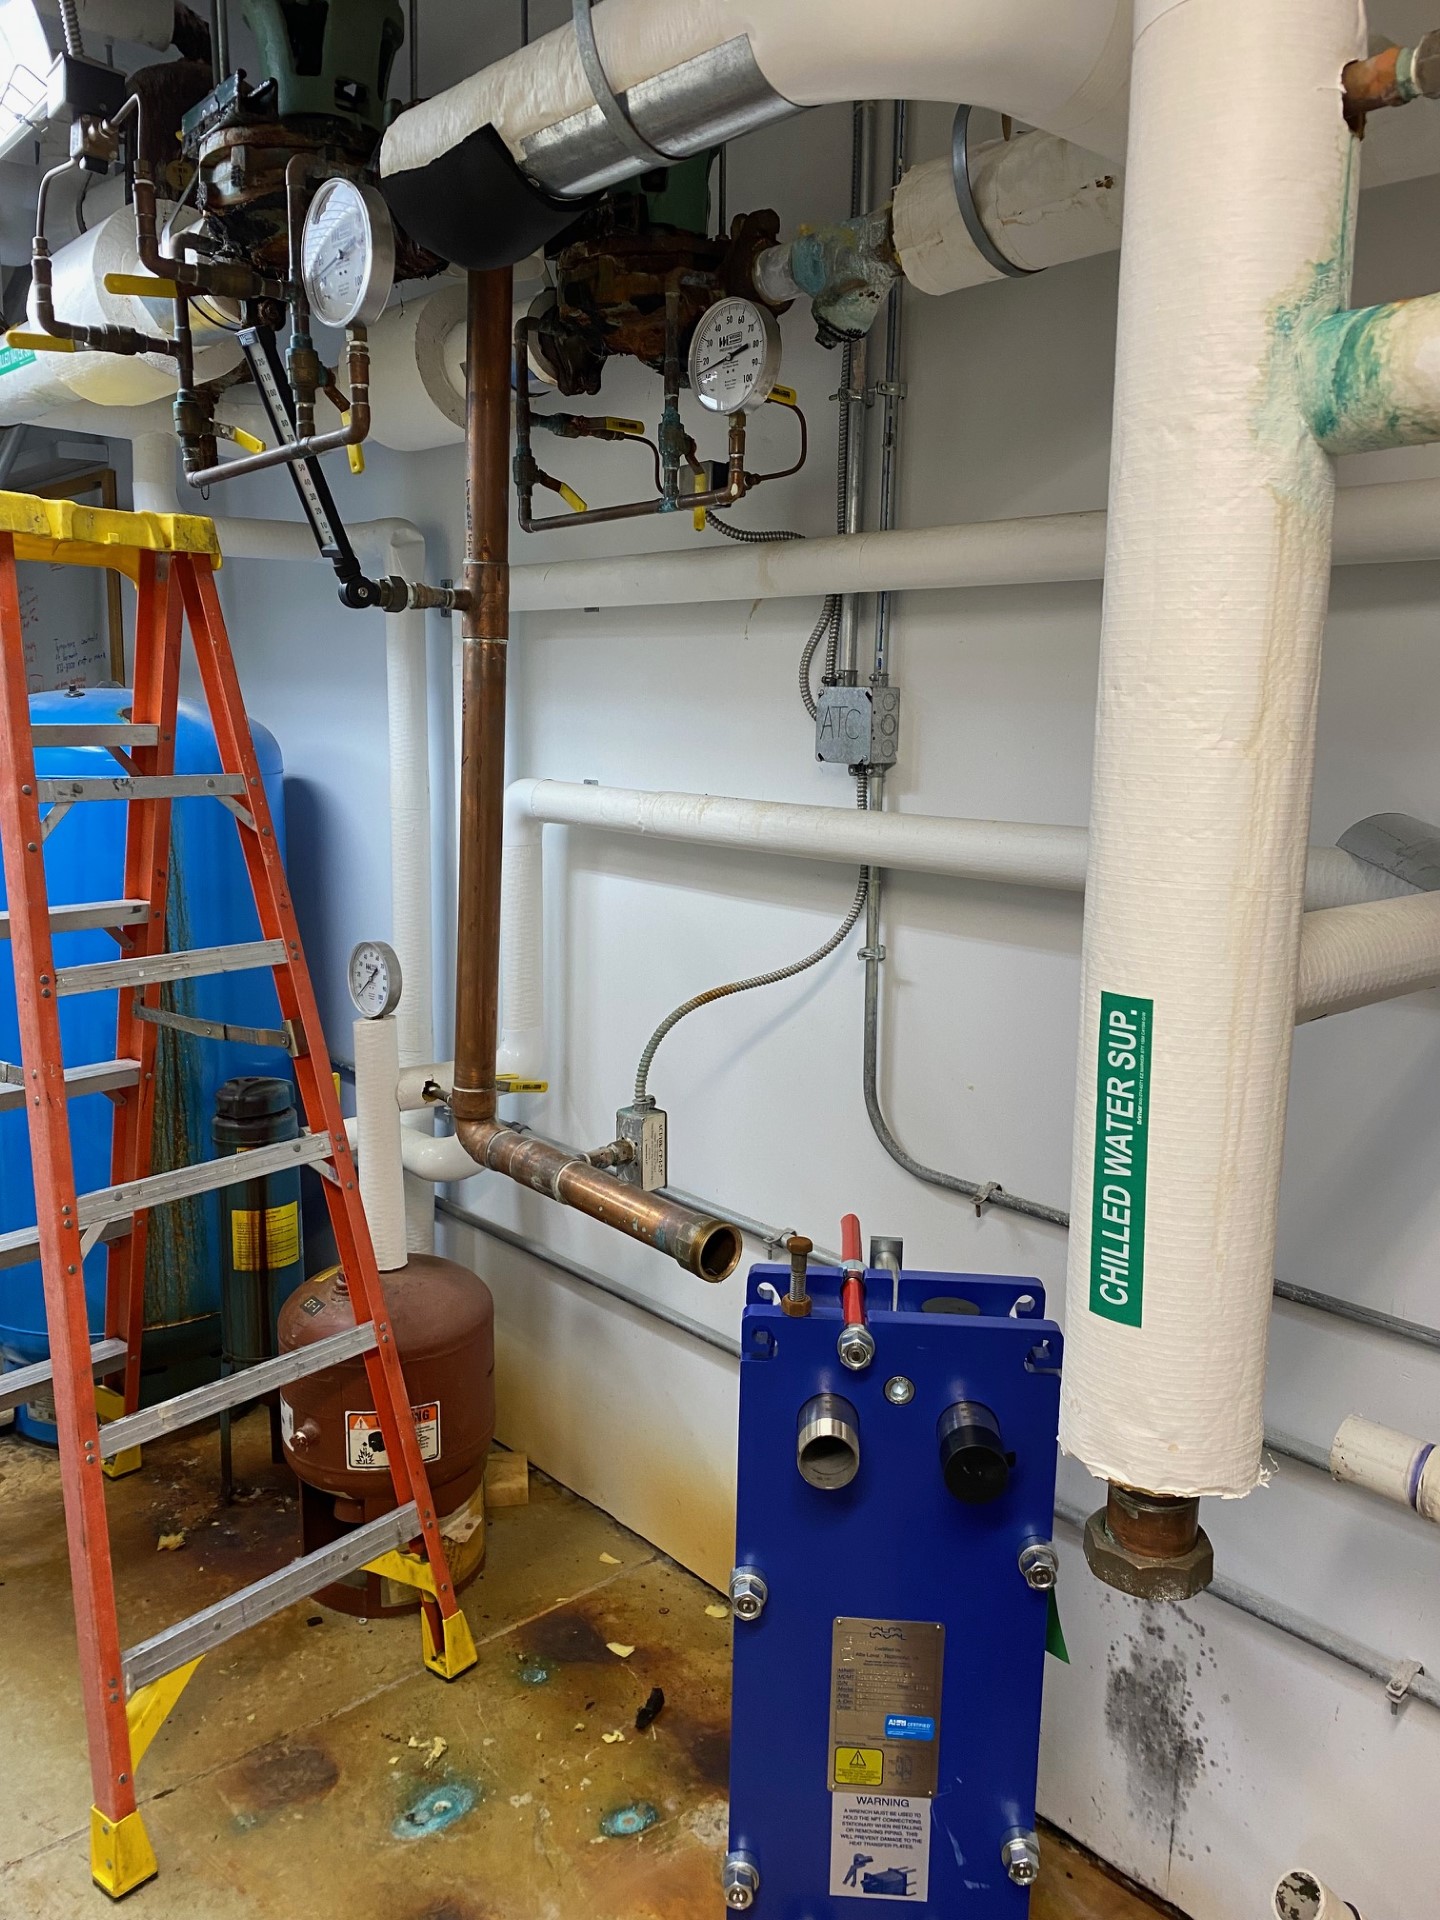 Orange ladder sits next to a heat exchanger system in a utility room.